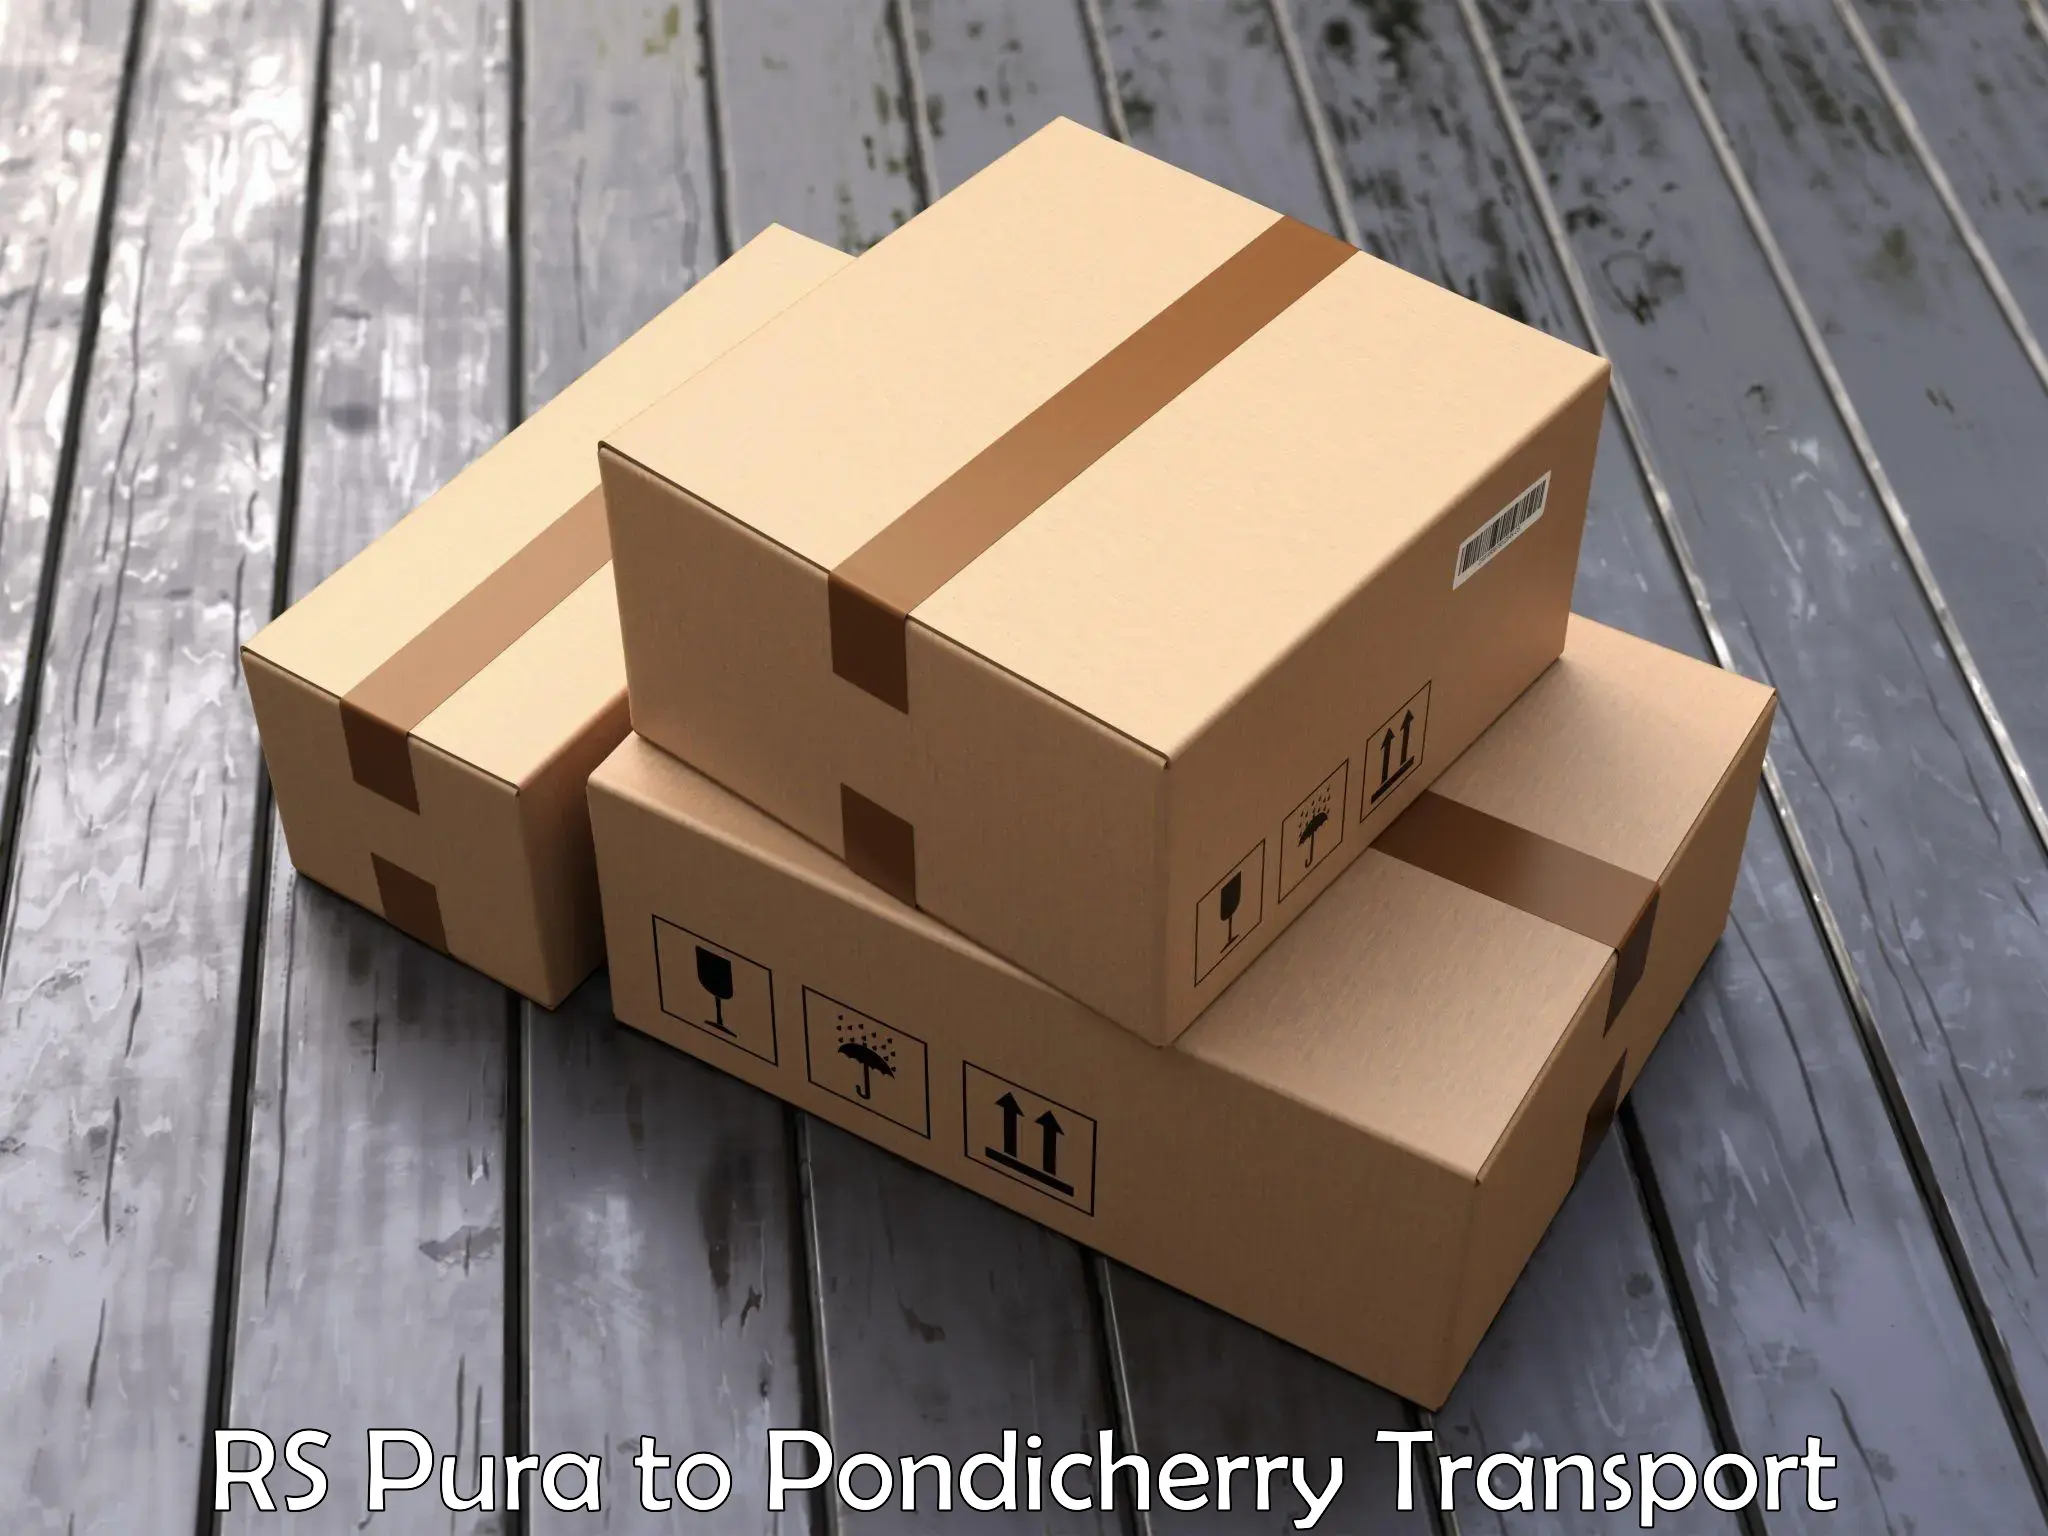 Daily parcel service transport RS Pura to Pondicherry